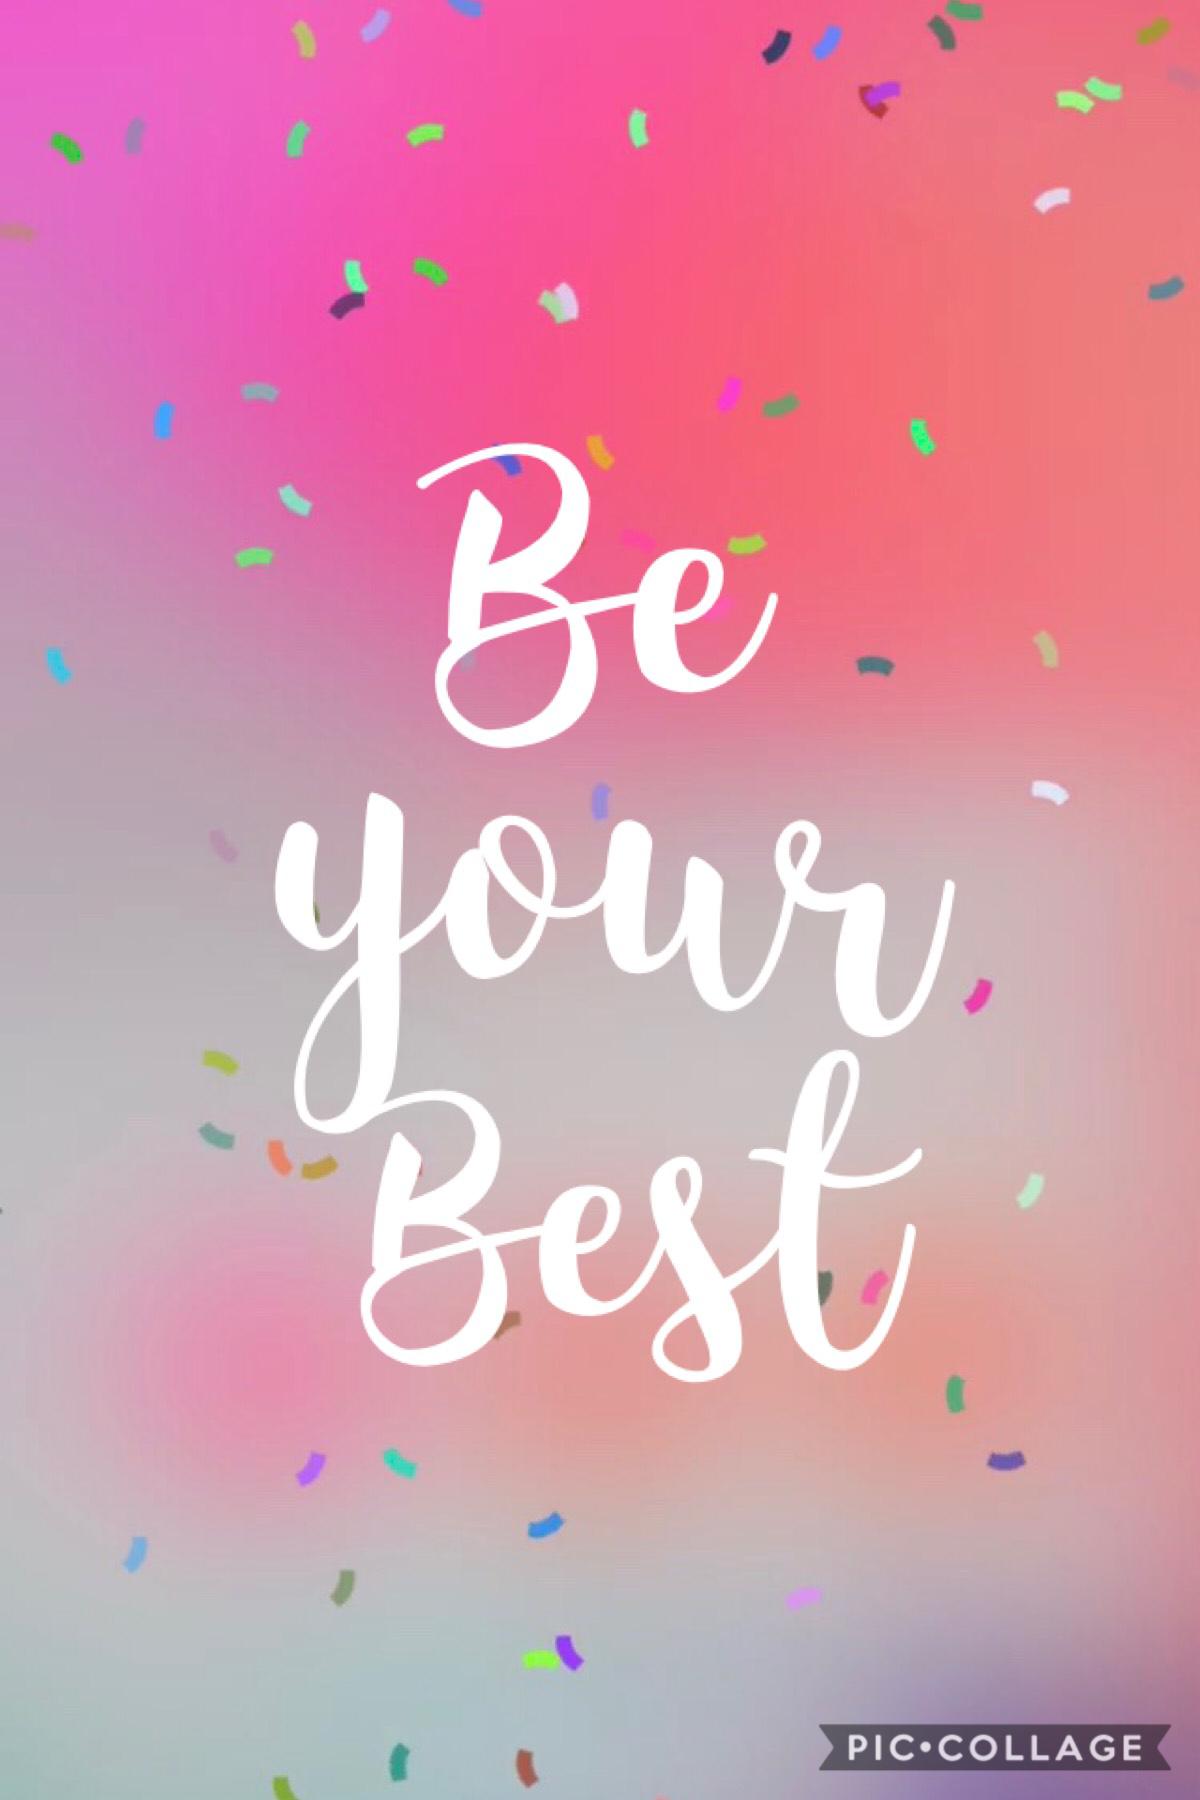 Tap
Be your best! Don’t give up and keep going! You got this! Have a great day, UN1QUElets! 💖-BE_UN1QUE